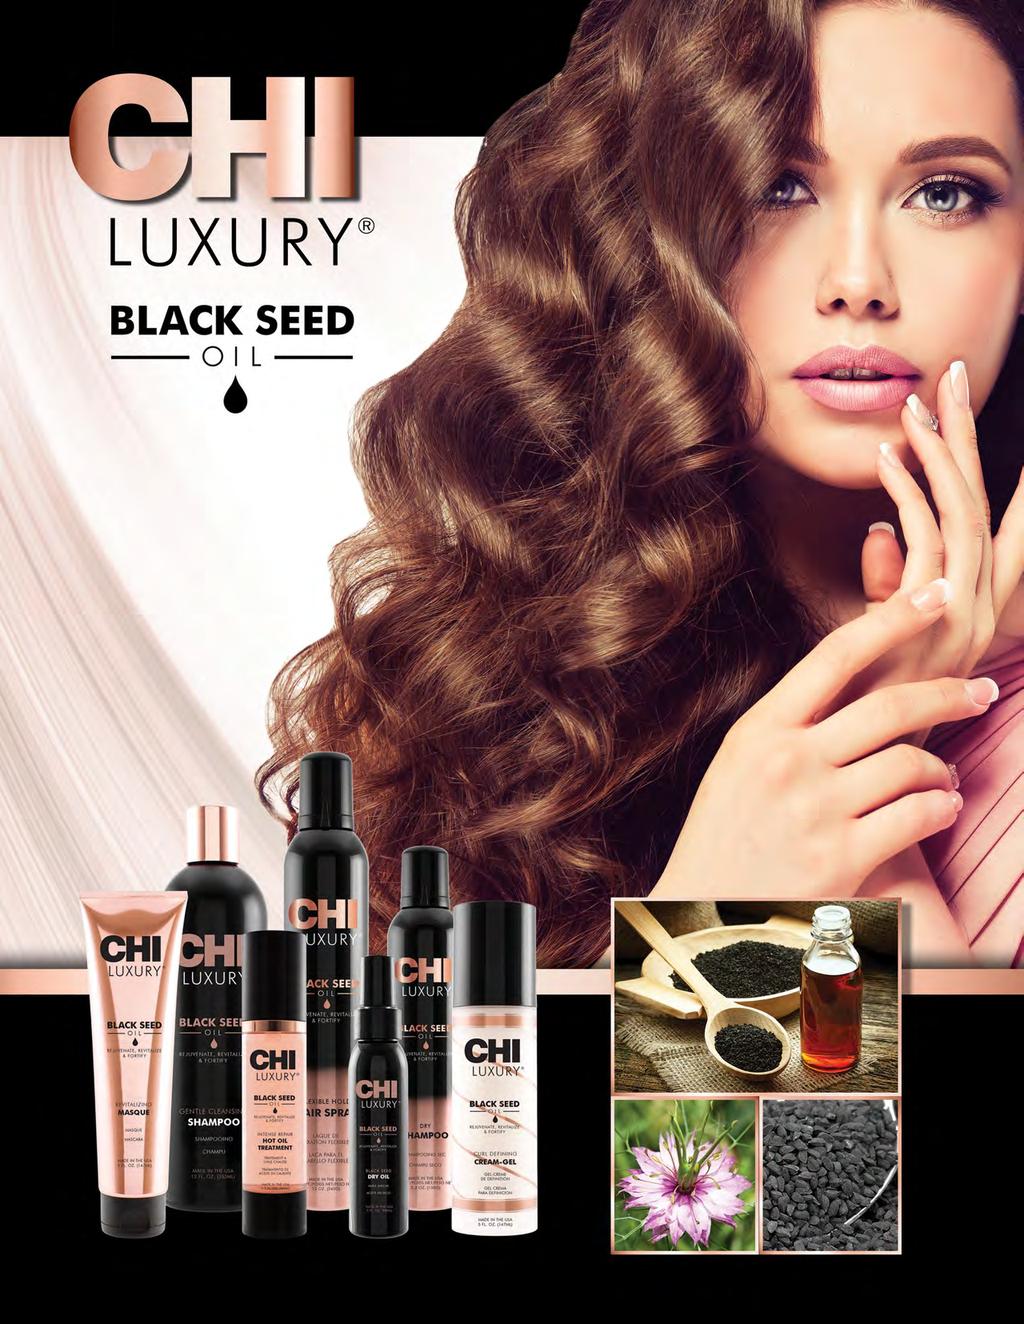 BLACK SEED OIL Luxurious and highly treasured oil is derived from the pressed seeds of the Nigella Sativa, a flowering plant known to thrive in severely dry conditions of the Mediterranean region by